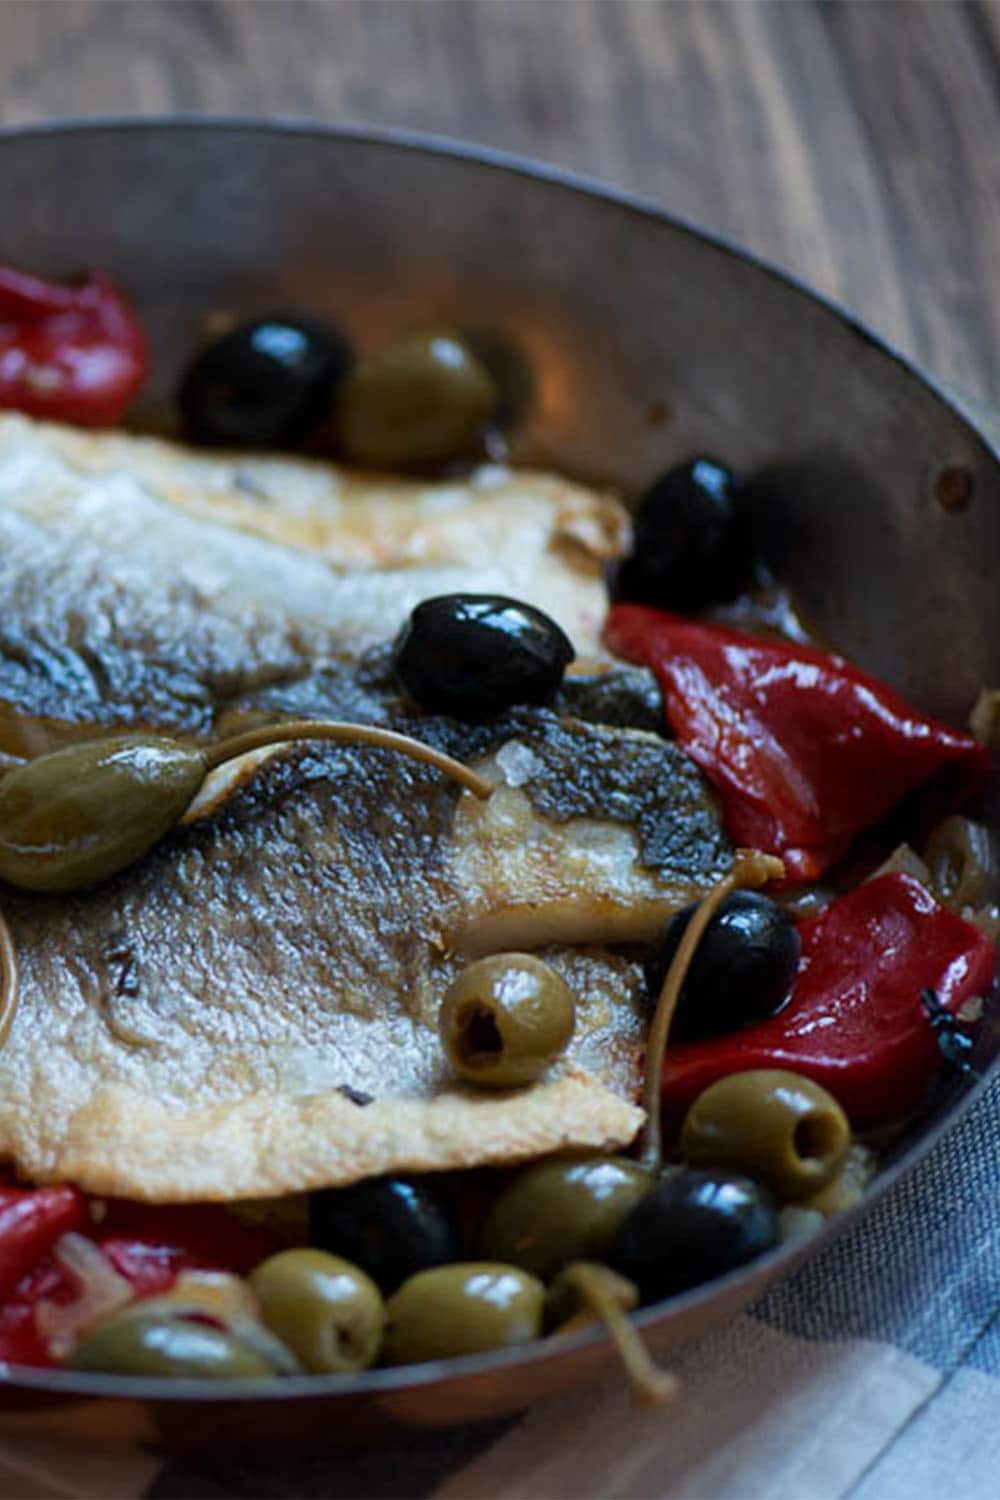 Pan-Fried Sea Bass With Piquillo Peppers Recipe